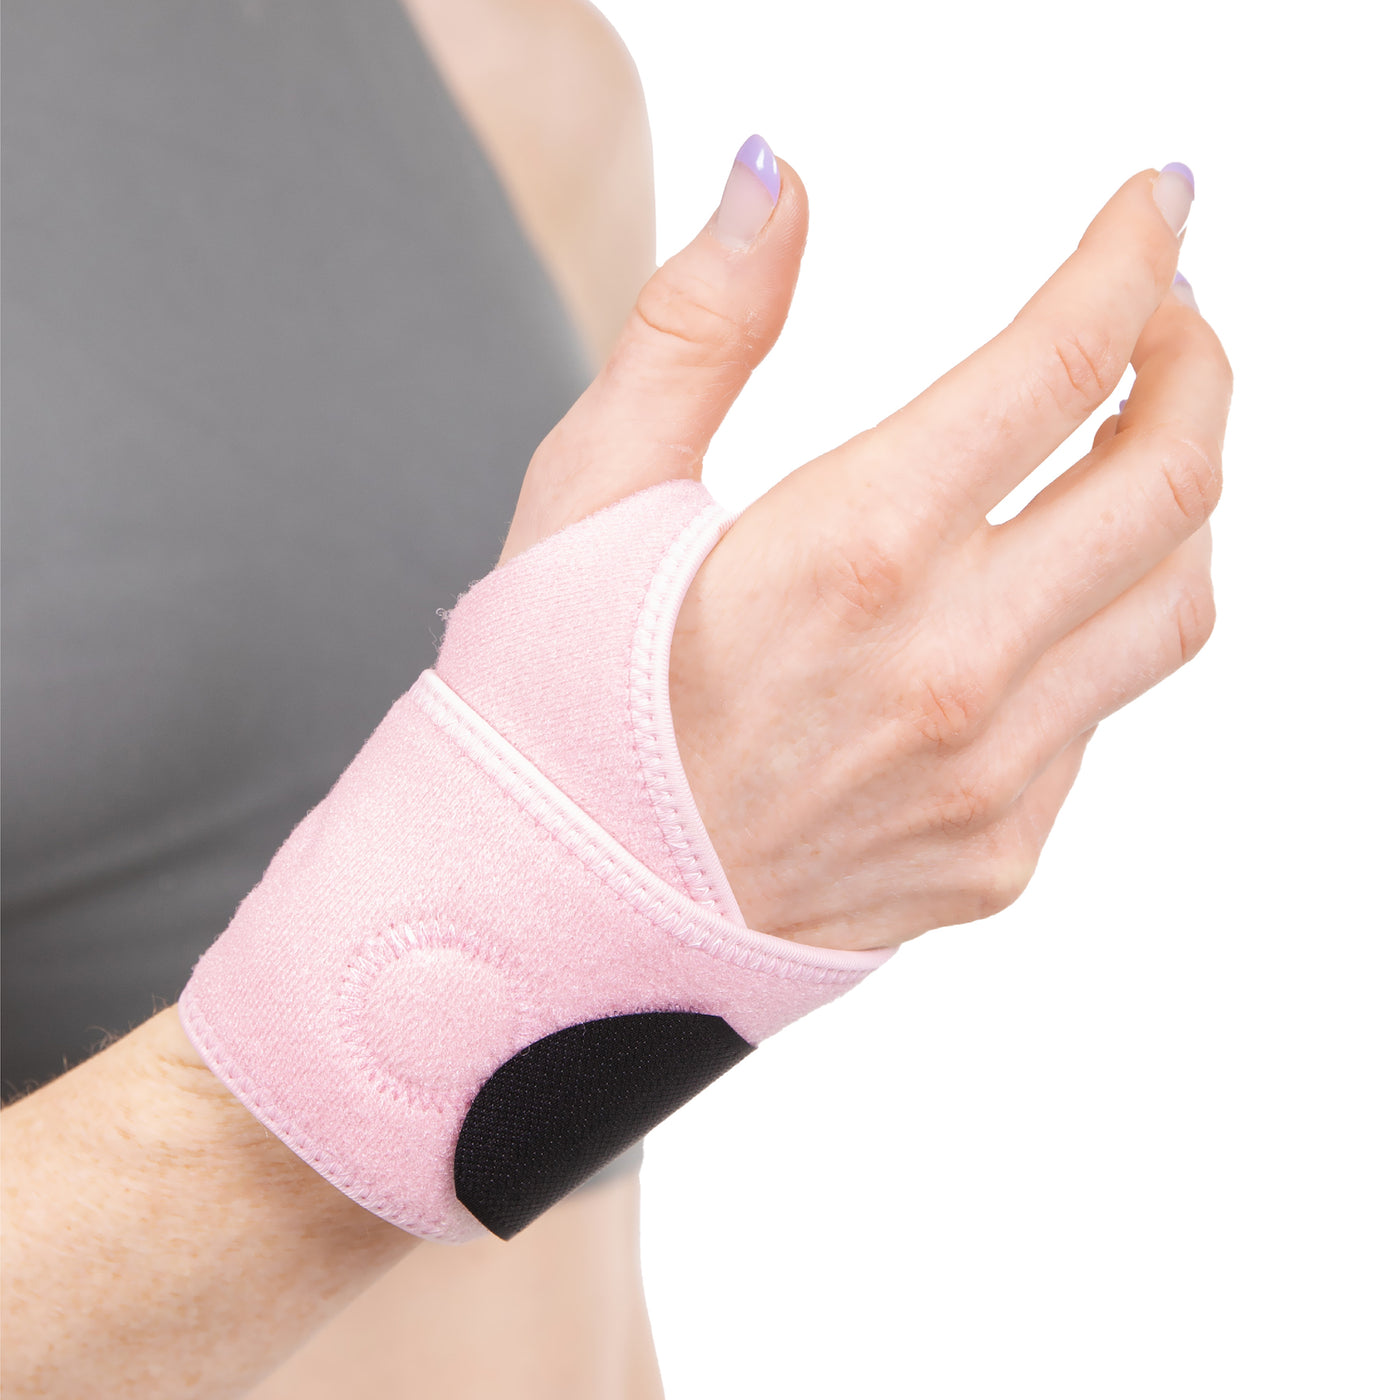 COPPER HEAL Long WRIST SLEEVE with Adjustable Bandage - Suitable for Both  Right & Left Hands Strap Short Sleeves Wraps Medical Recovery Pain Relief